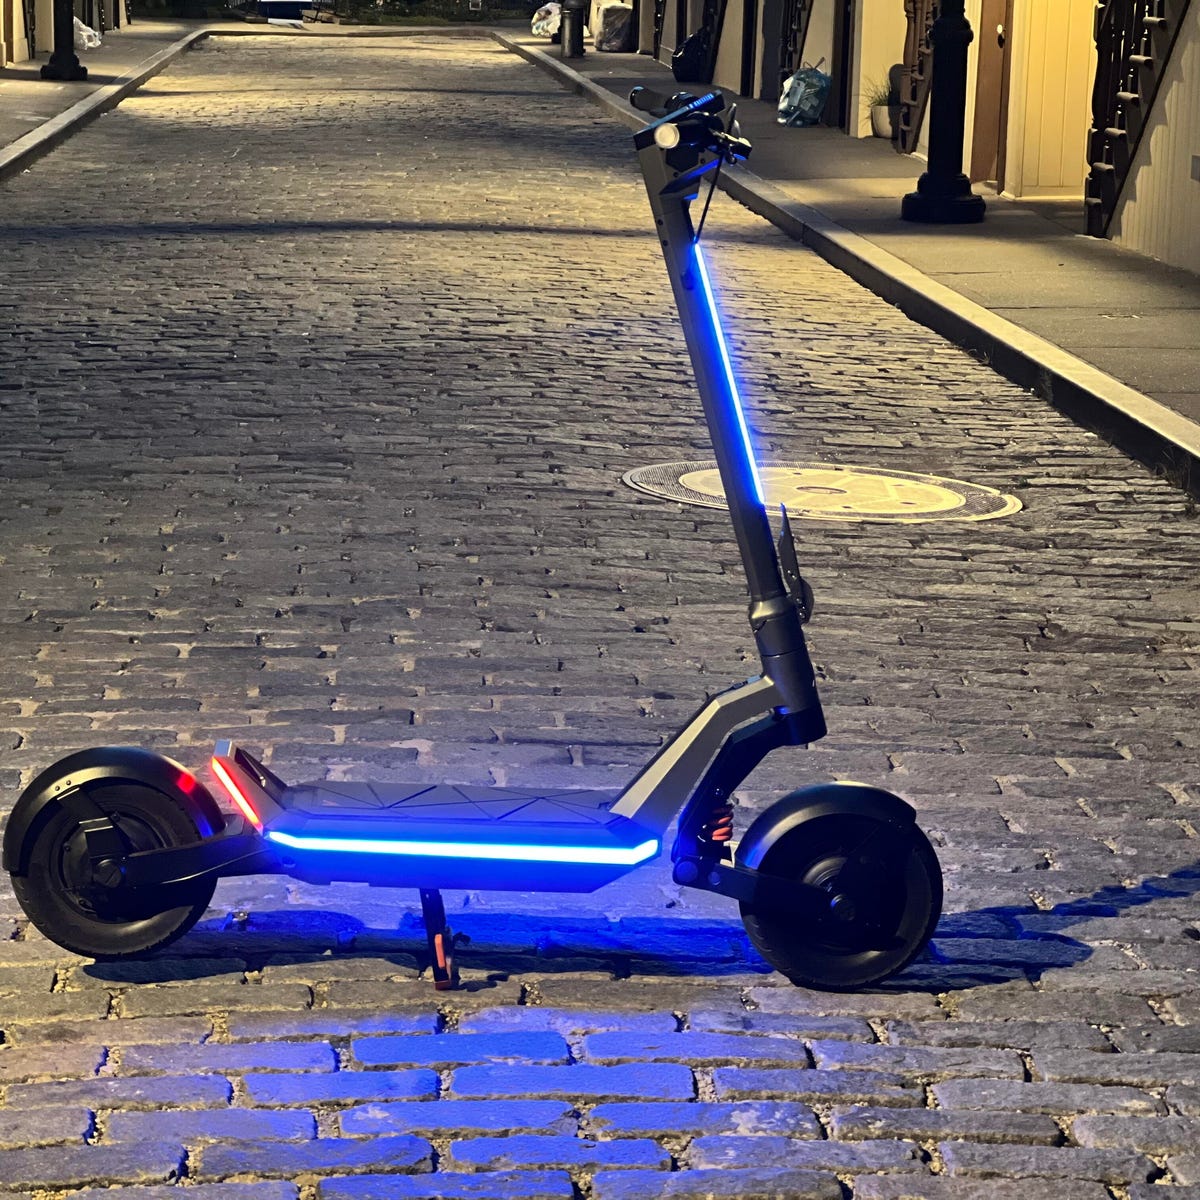 Apollo Pro V6 Electric Scooter Review: Scooter, Premium Price - CNET